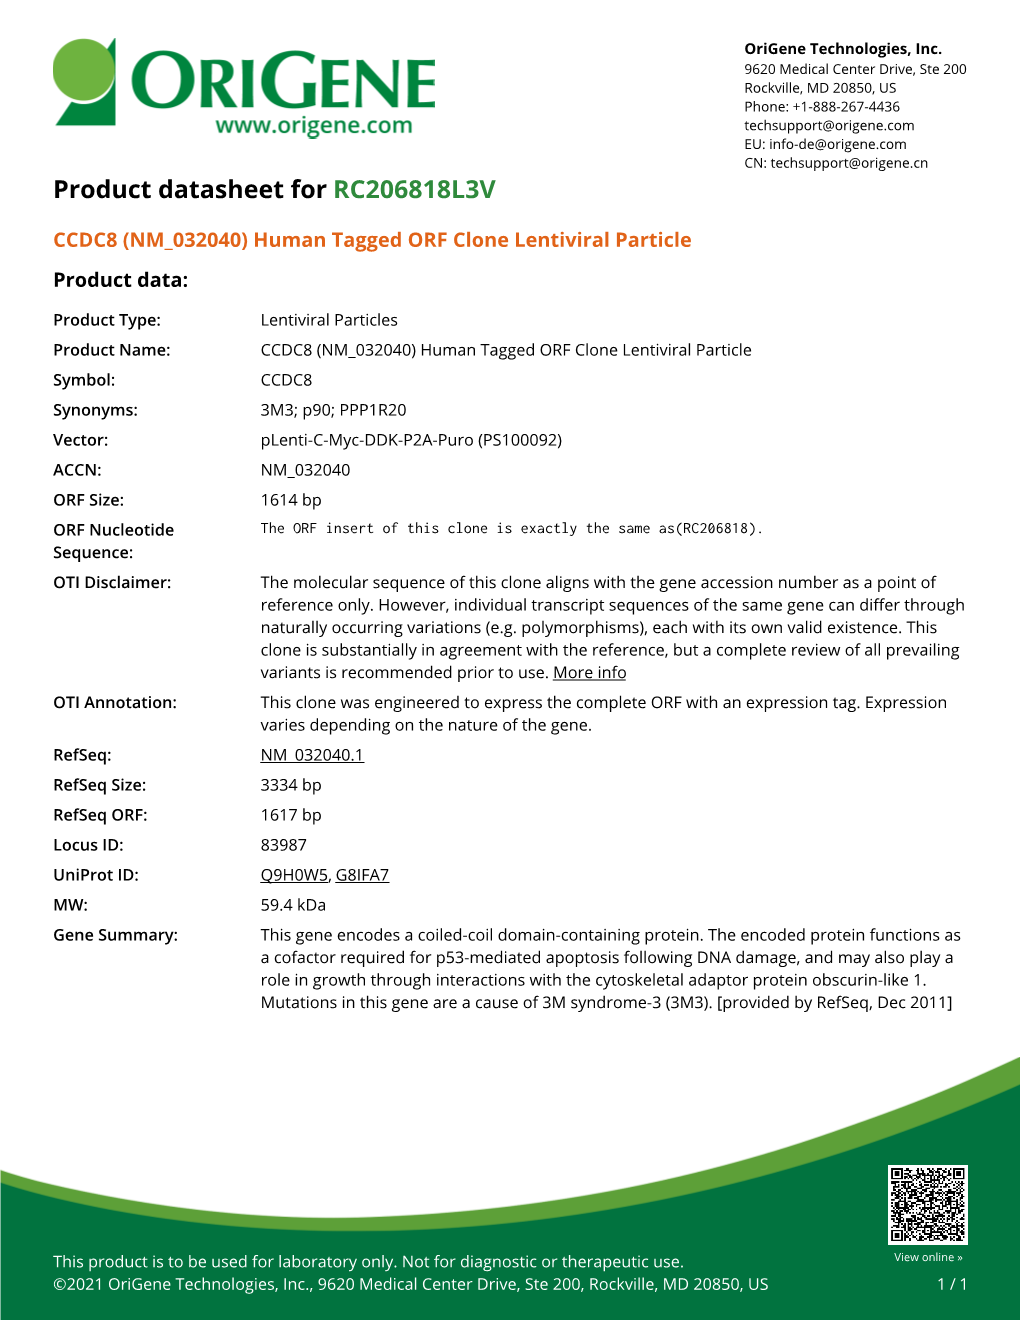 CCDC8 (NM 032040) Human Tagged ORF Clone Lentiviral Particle Product Data